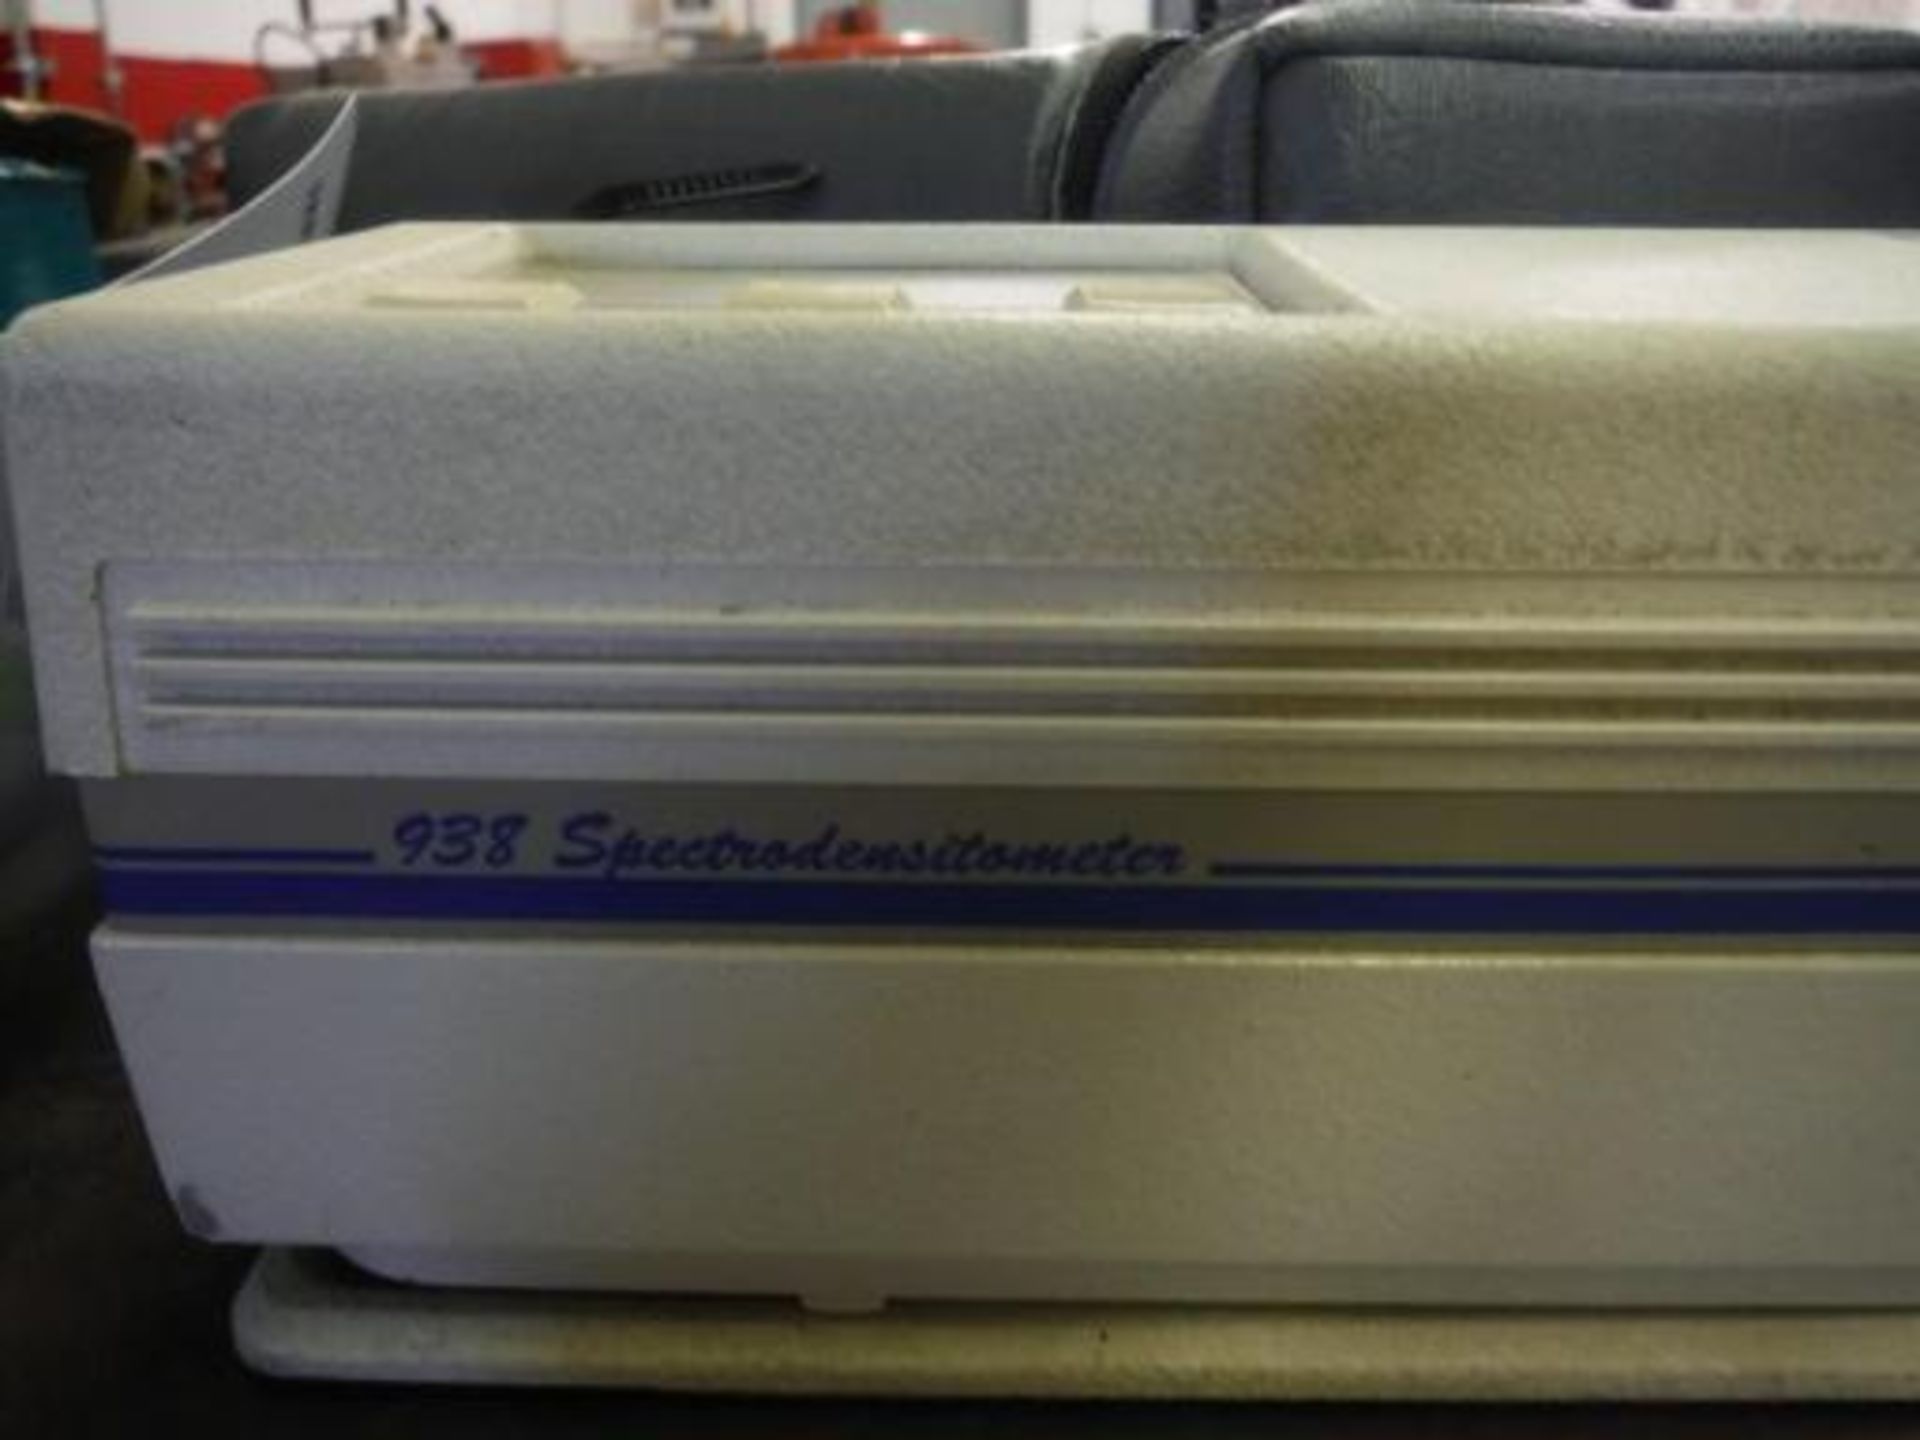 X-Rite 938 Spectrodensitometer in case. Located in Marion, Ohio Rigging Fee: $25 - Image 2 of 2